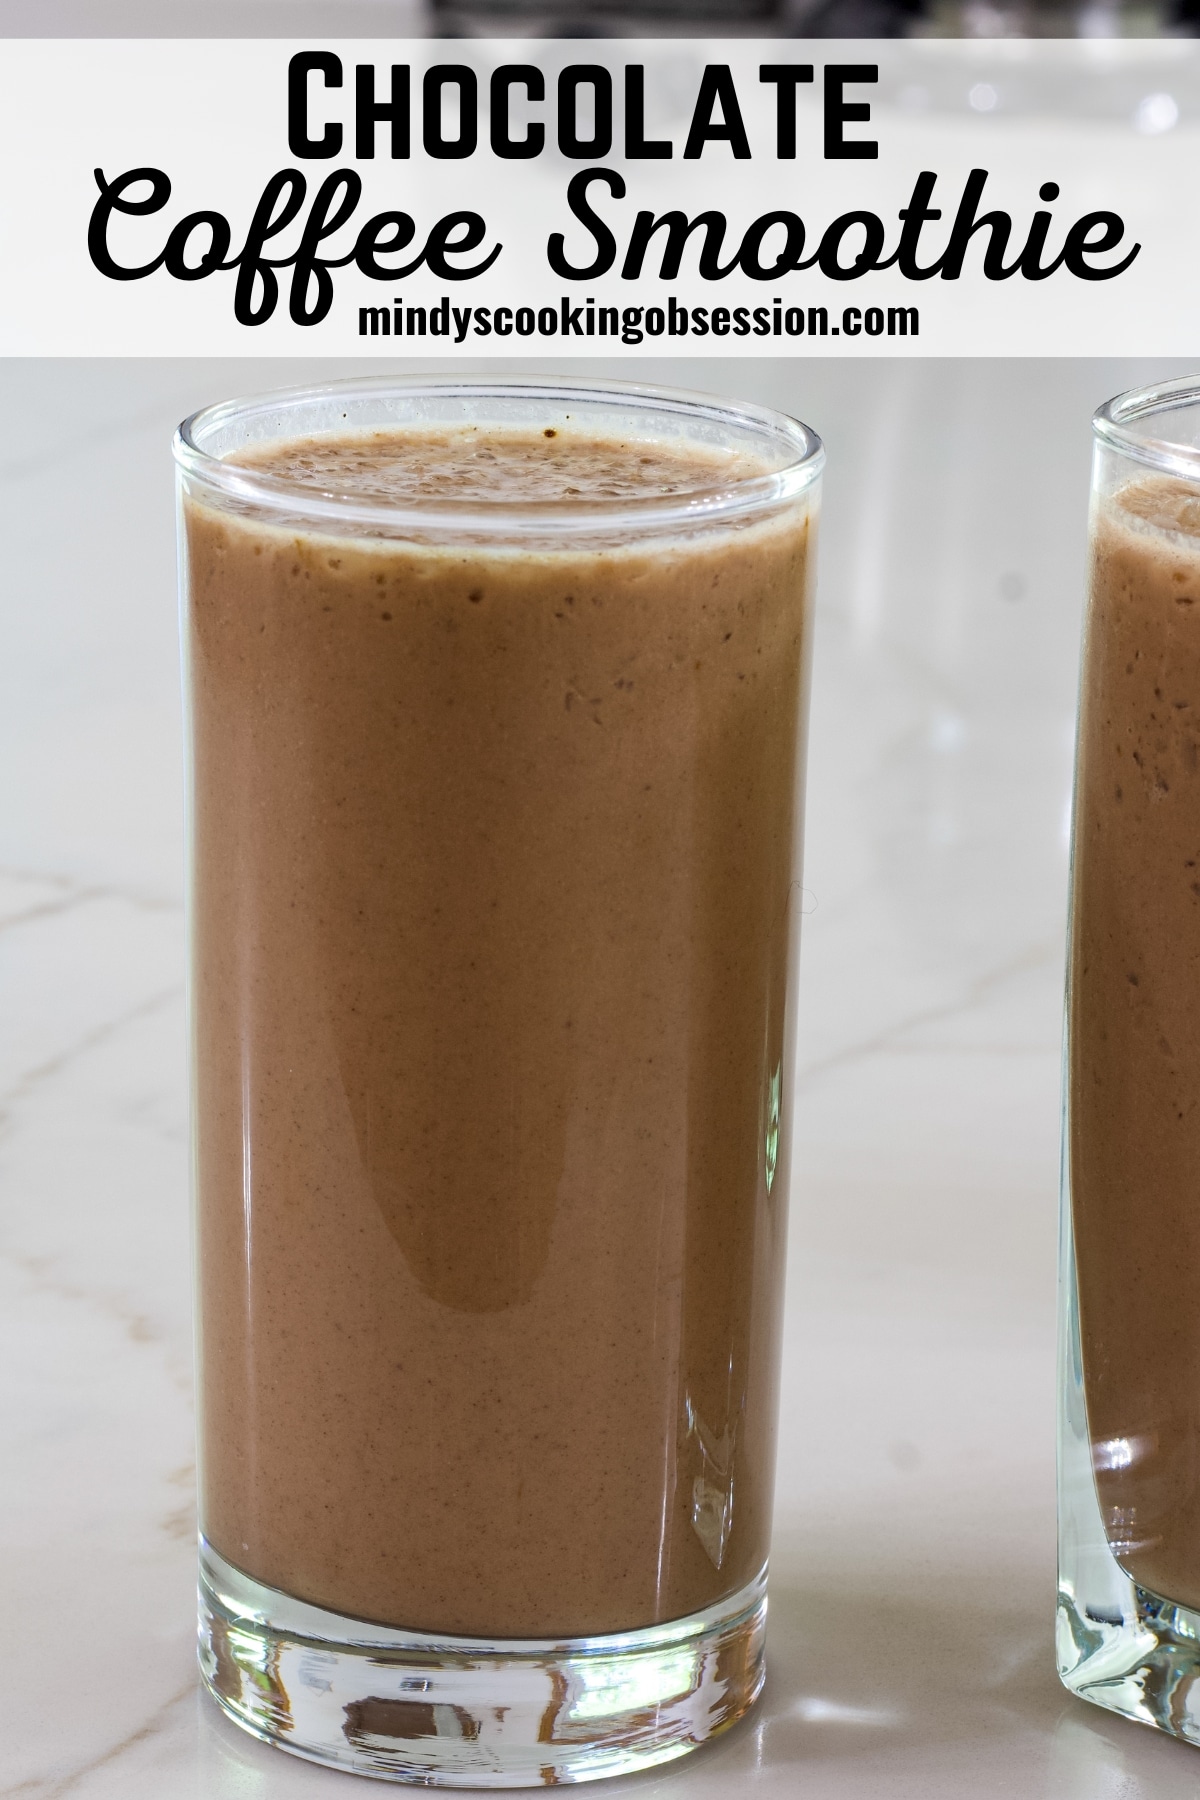 Easy & Healthy Chocolate Coffee Smoothie Recipe is made with healthy ingredients and the kick of caffeine makes it perfect for busy mornings.  via @mindyscookingobsession